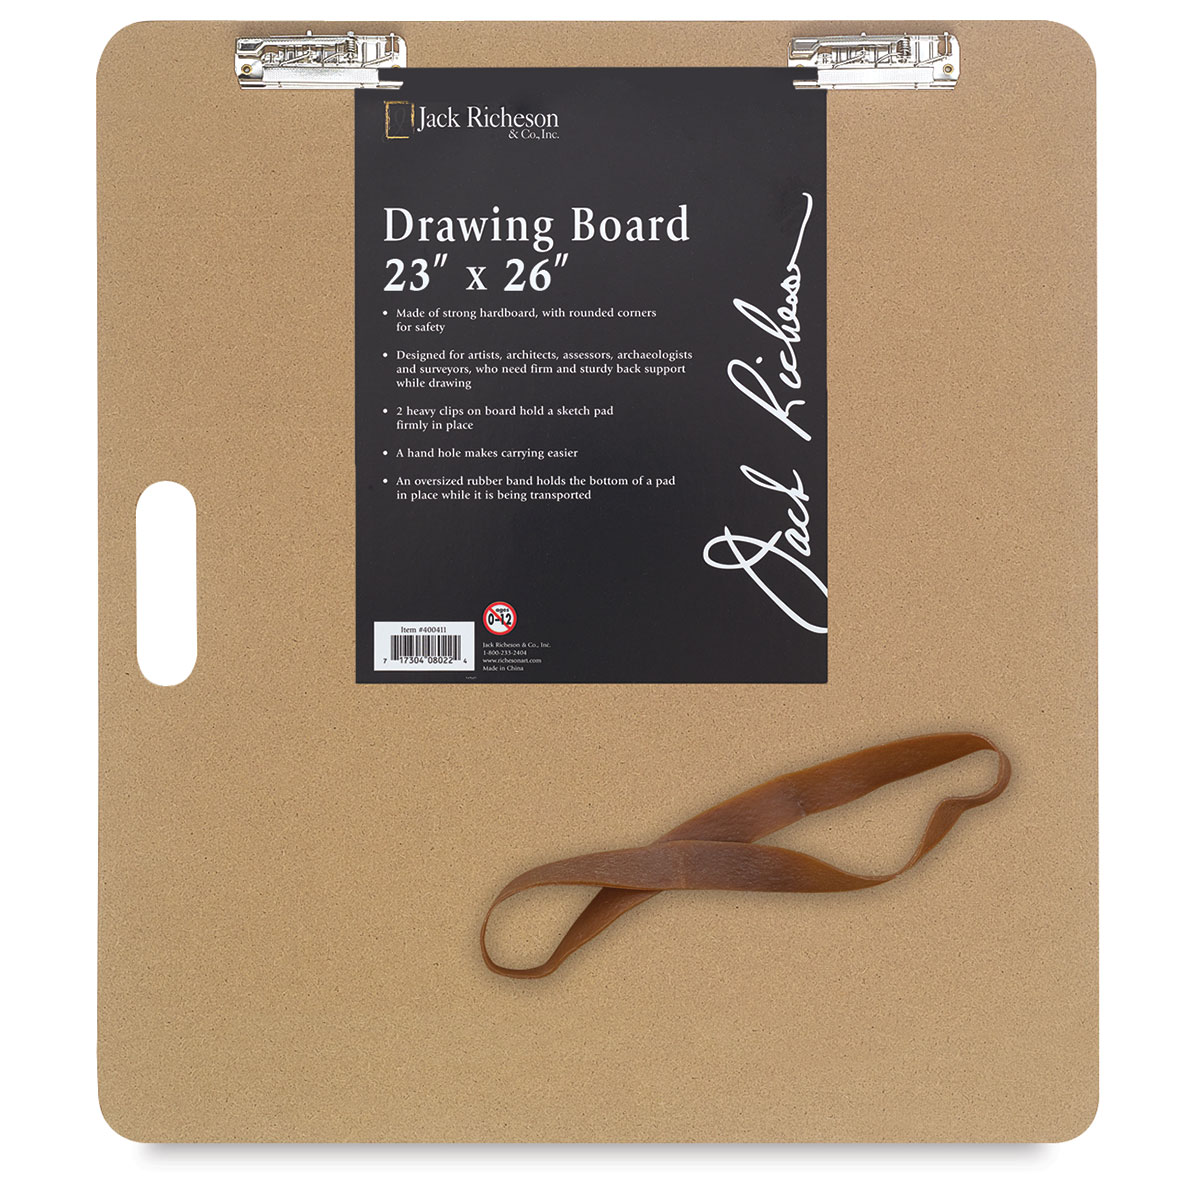 Drawing Board Clip - Sprung Carbon Steel Made In UK - Buy 8-12-20-40 & SAVE  £££ | eBay